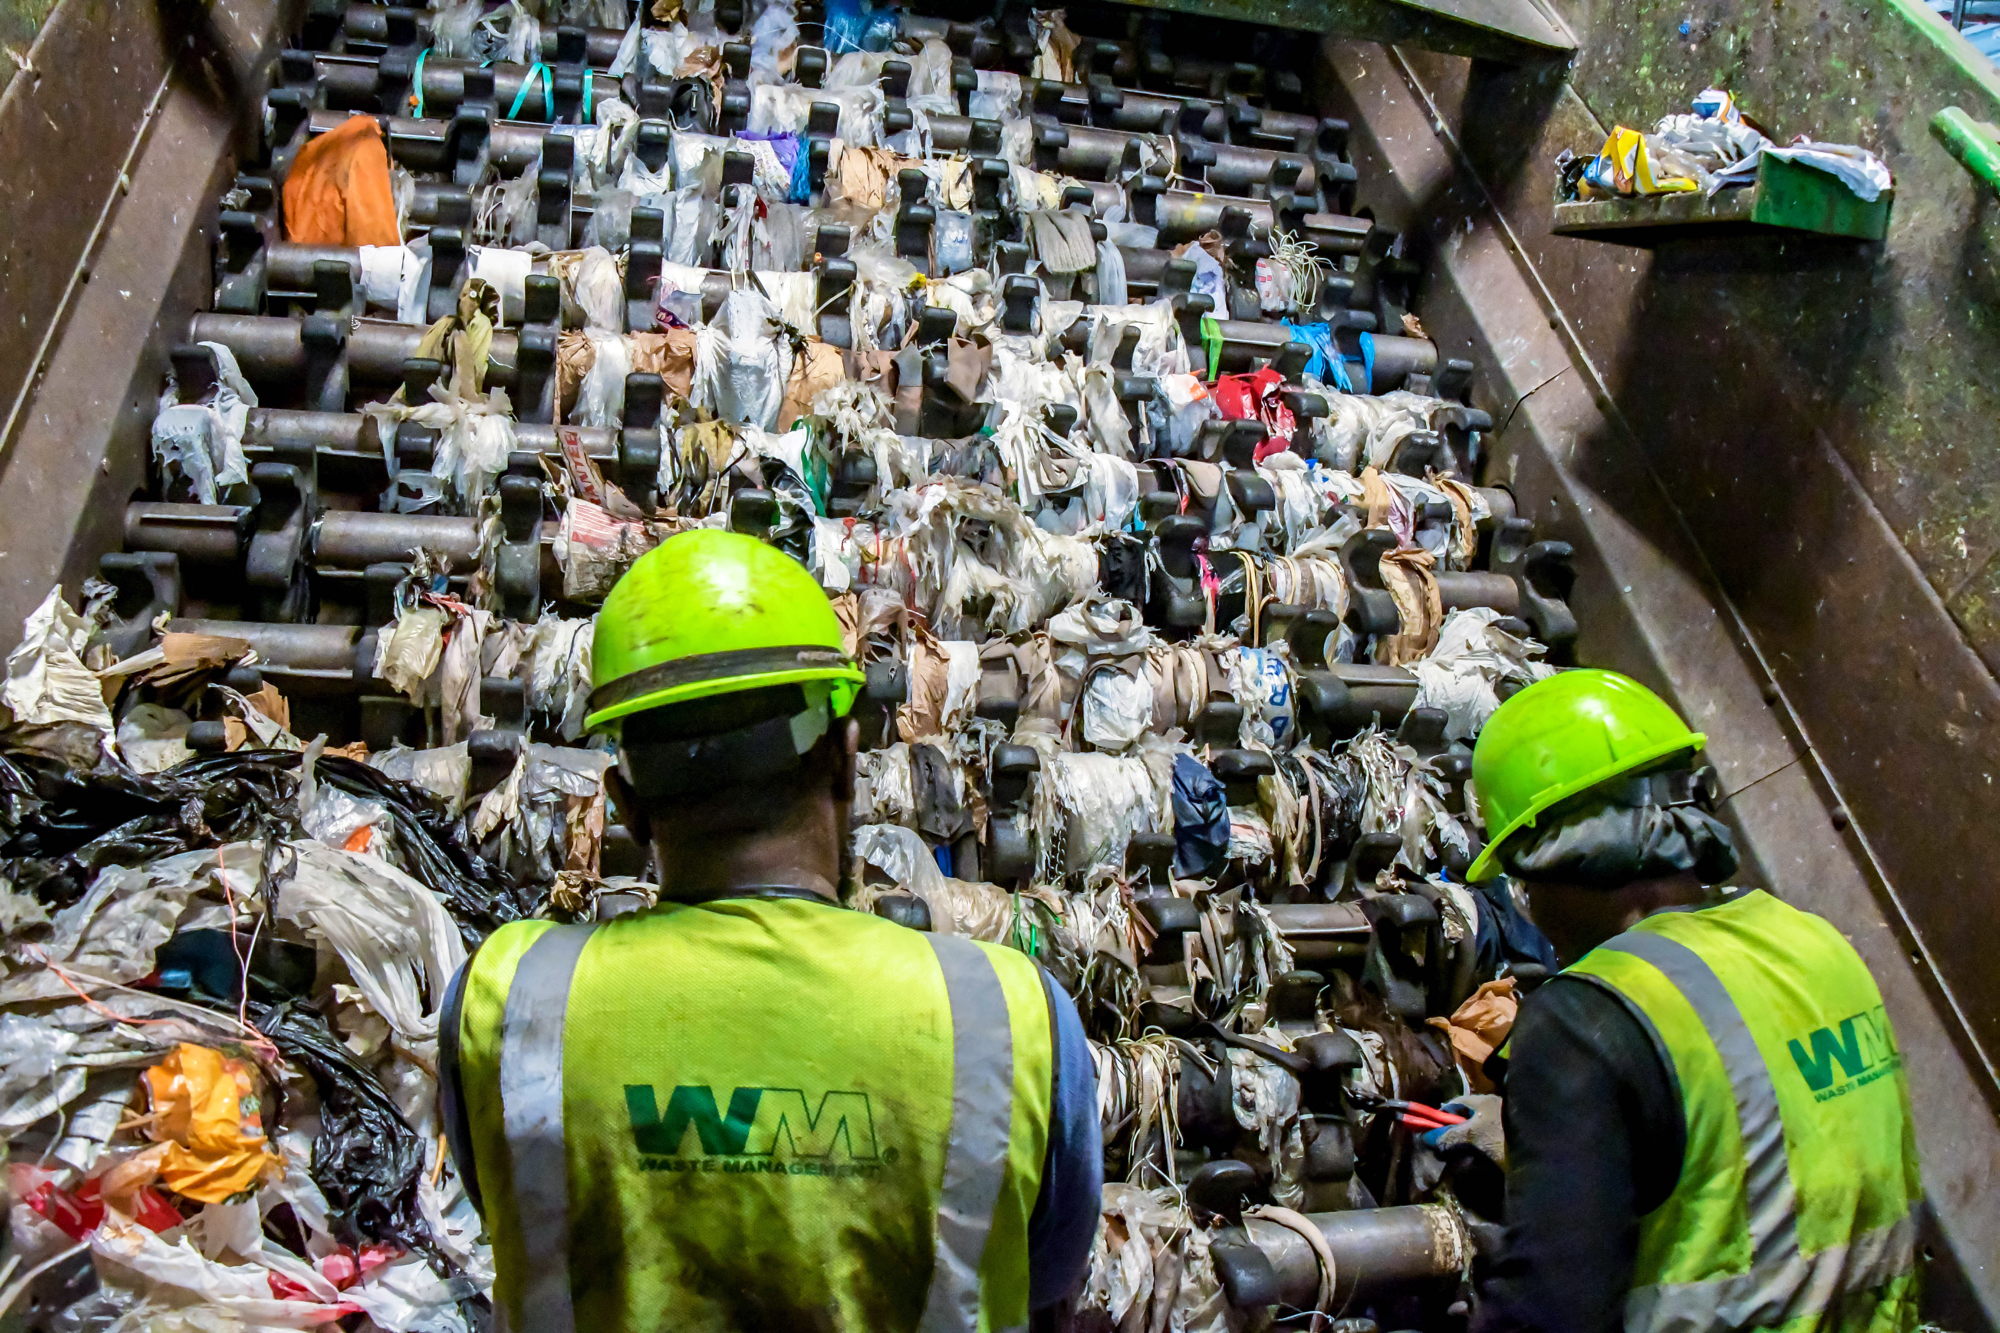 Plastic bags can cause recycling equipment to jam and are the most common contaminants of recyclables. Although they can be recycled separately, they are not supposed to be mixed in with other recyclables.